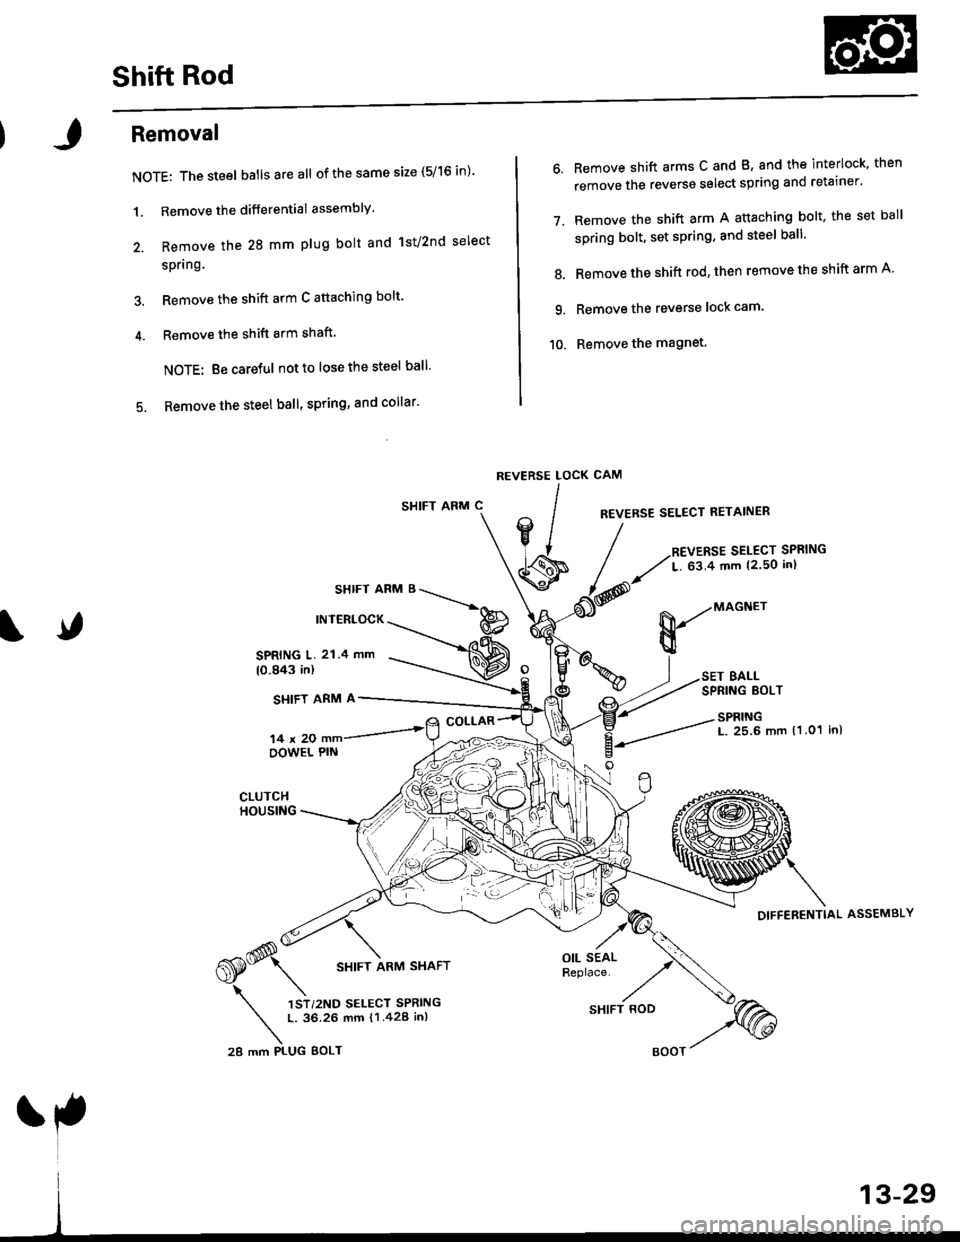 HONDA CIVIC 1998 6.G Workshop Manual Shift Rod
Removal
NOTE: The steel batlsareall of the same size (5/16 in)
1. Remove the differential assembly
2. Remove the 28 mm plug bolt and lst/2nd select
spring.
3. Remove the shift arm C attach